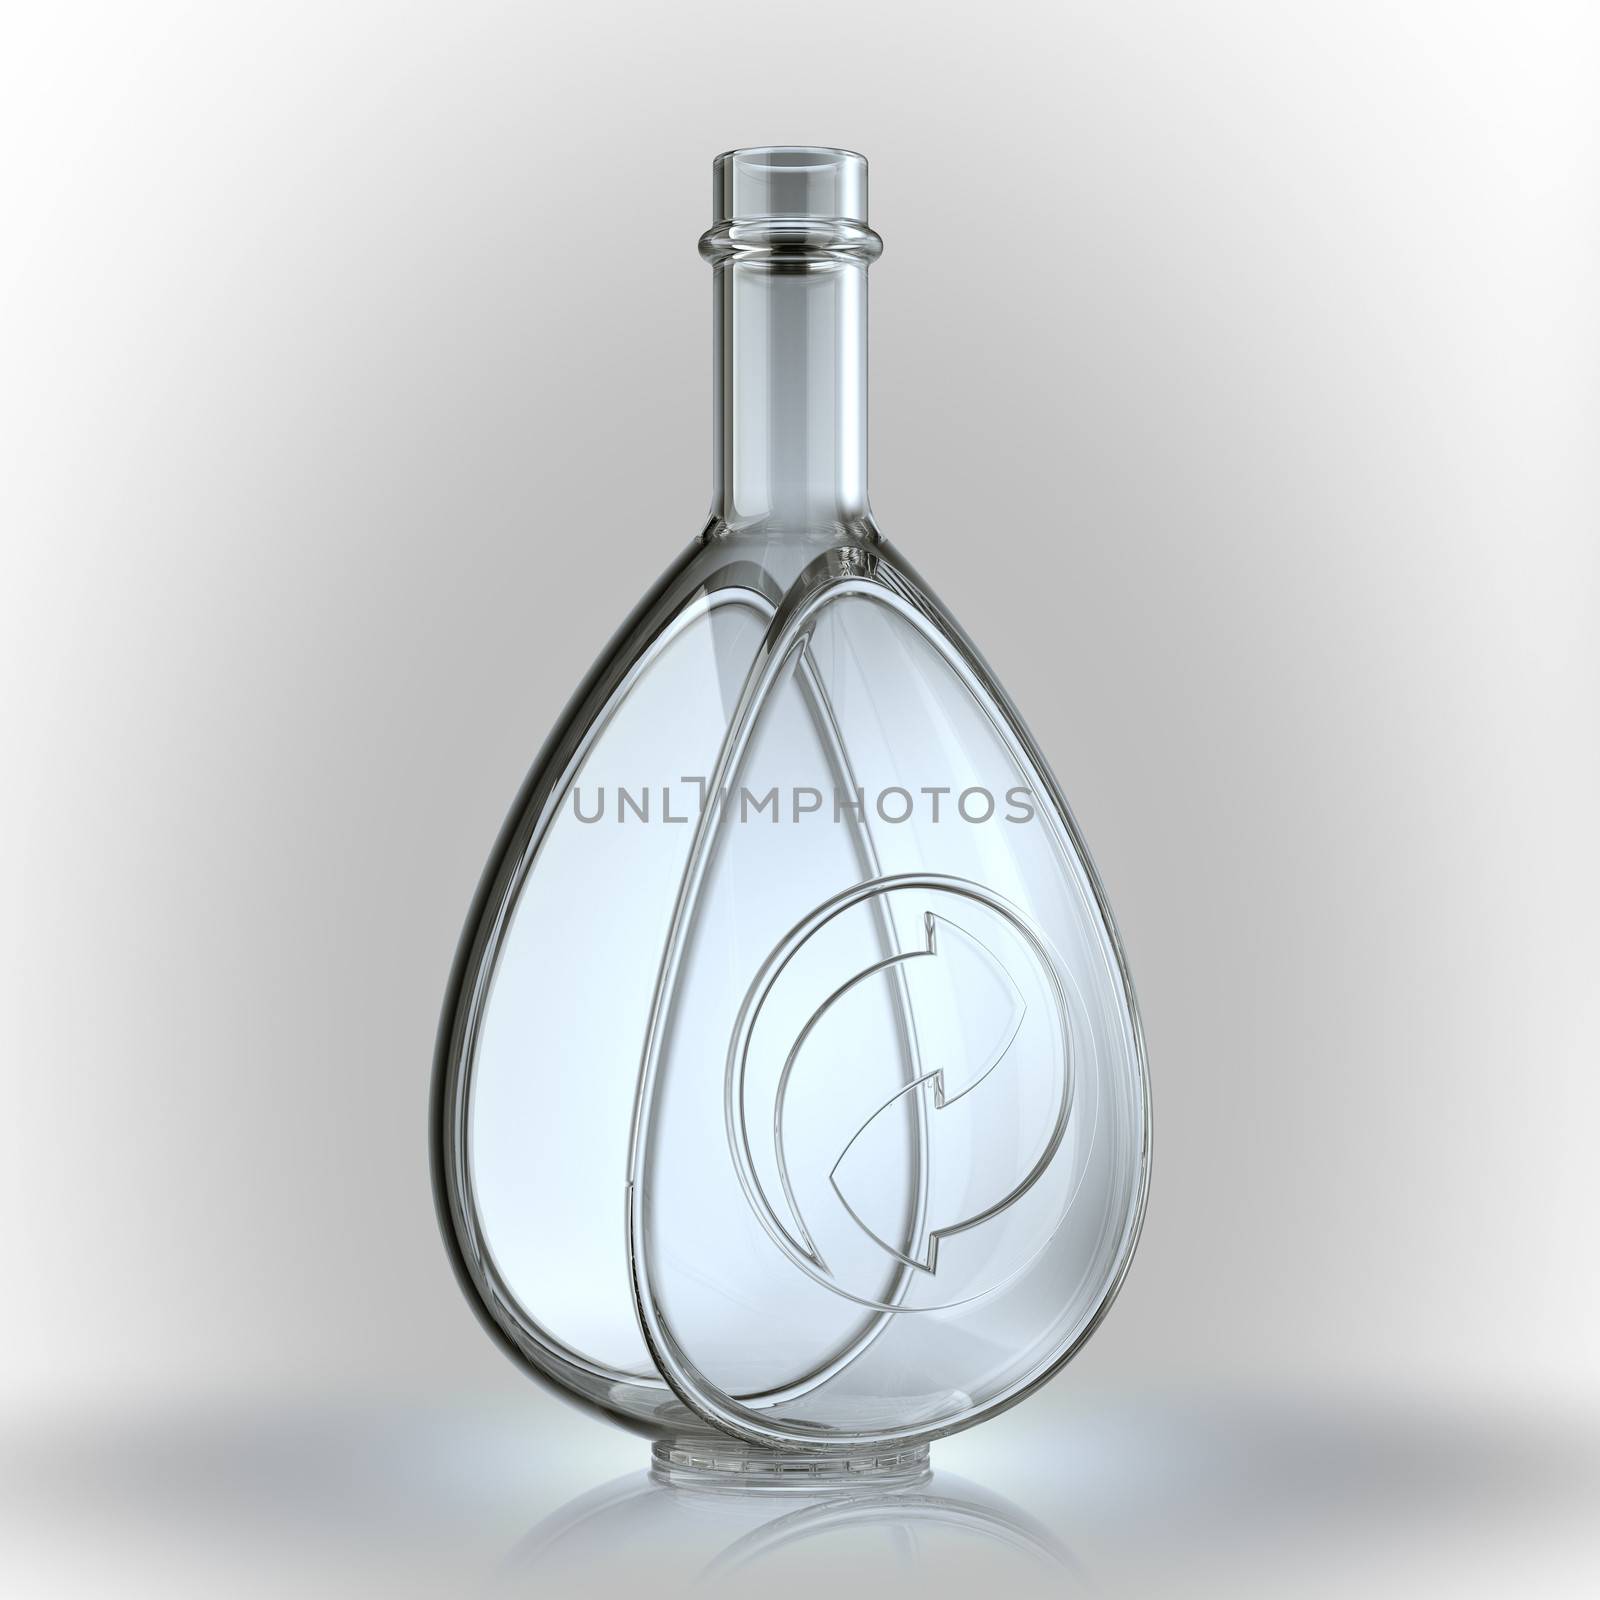 Recycled glass bottle manufacture concept by Arsgera